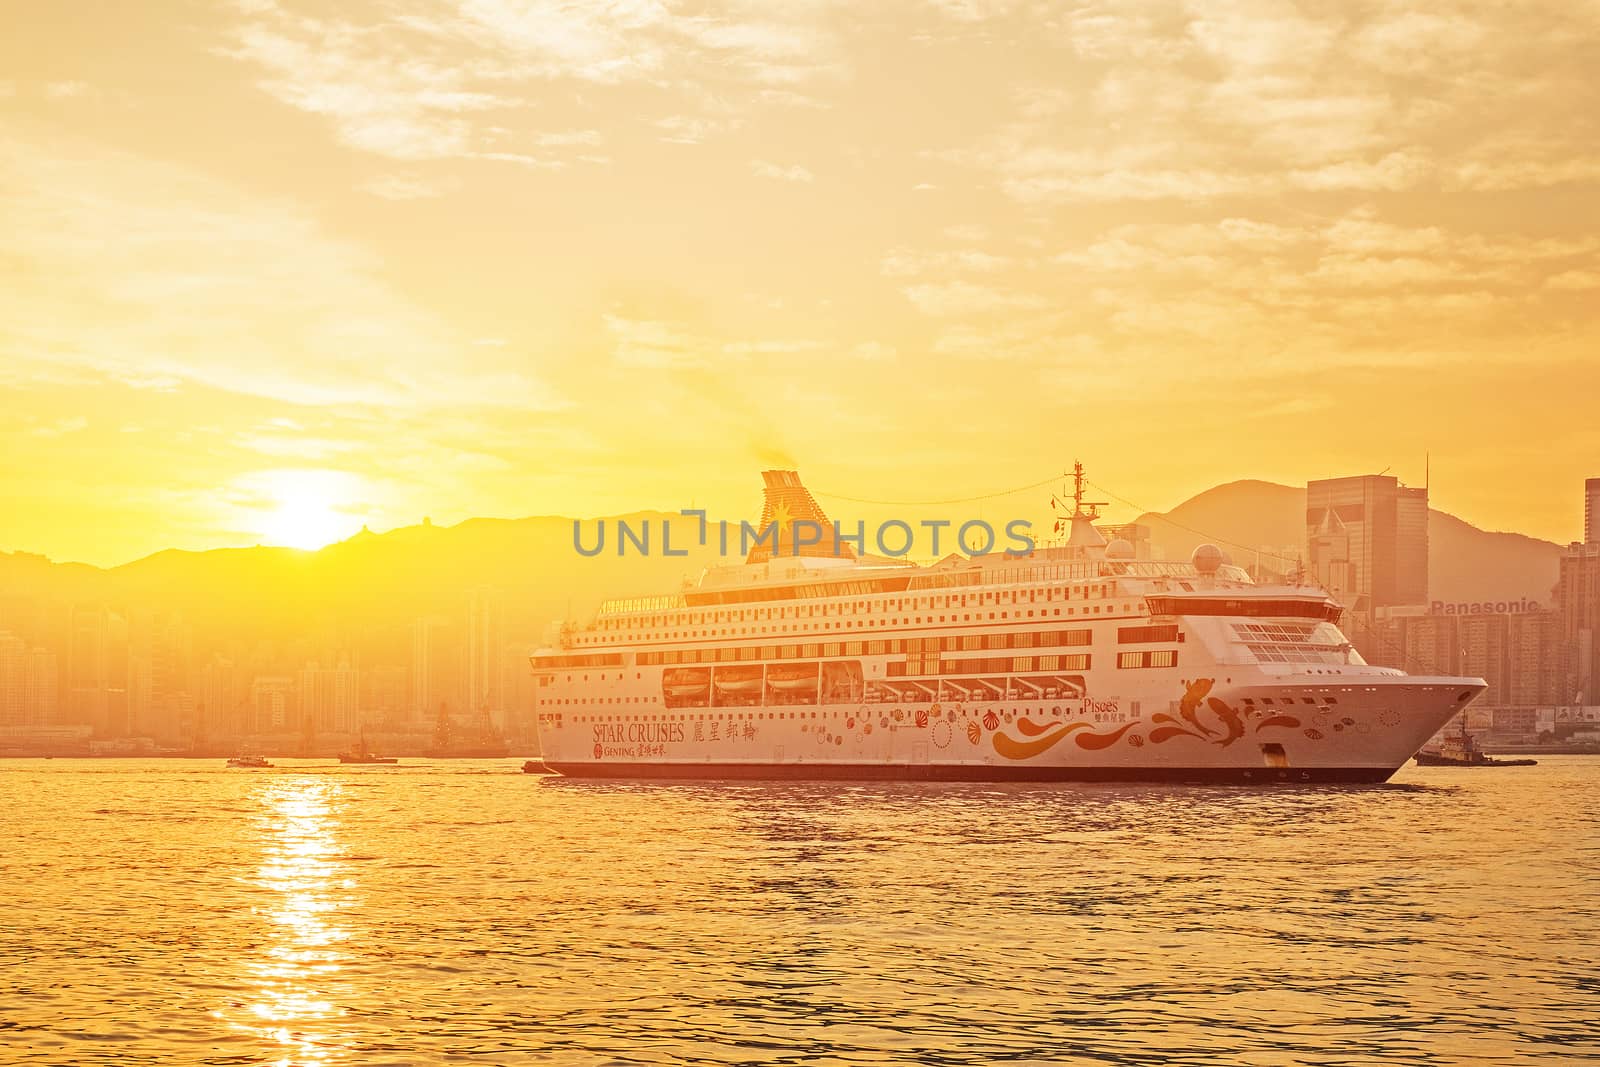 HONG KONG - JAN 13: Victoria Harbor on Jan 13, 2016 in Hong Kong. Big Cruise Ship departed from Ocean Terminal and drove across Victoria Harbor at sunrise.